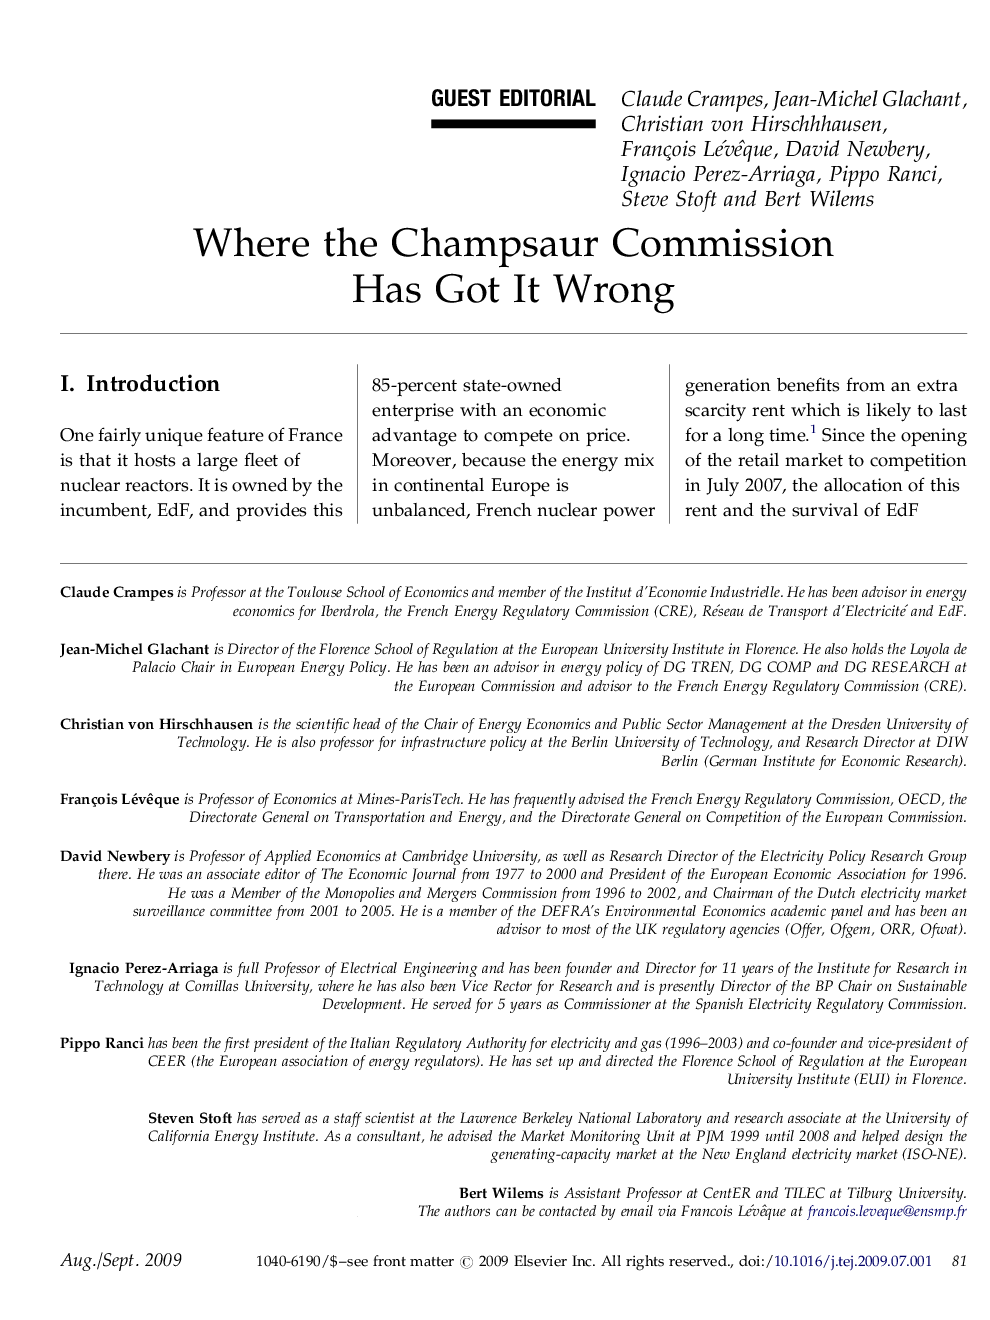 Where the Champsaur Commission Has Got It Wrong